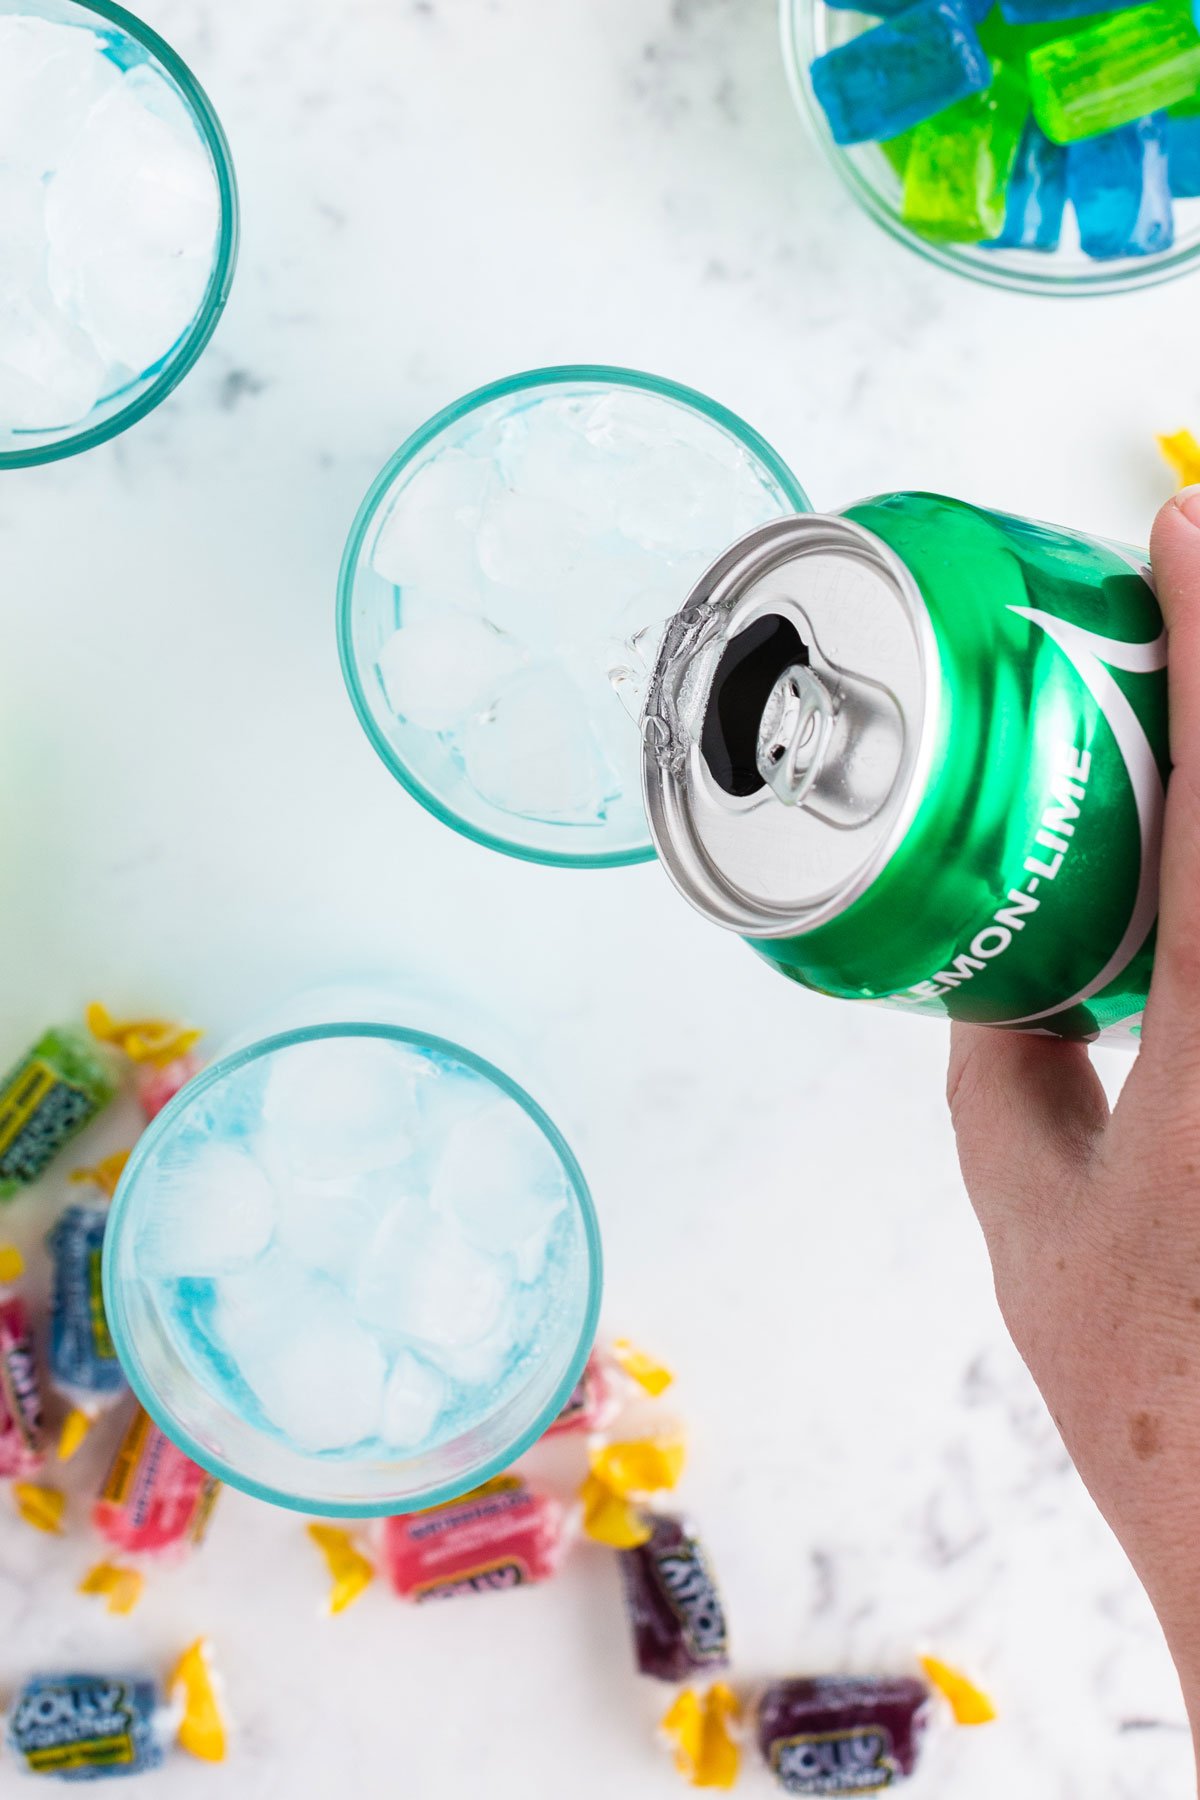 Can of Sprite being poured into cocktail glass to make the Jolly Rancher cocktails.